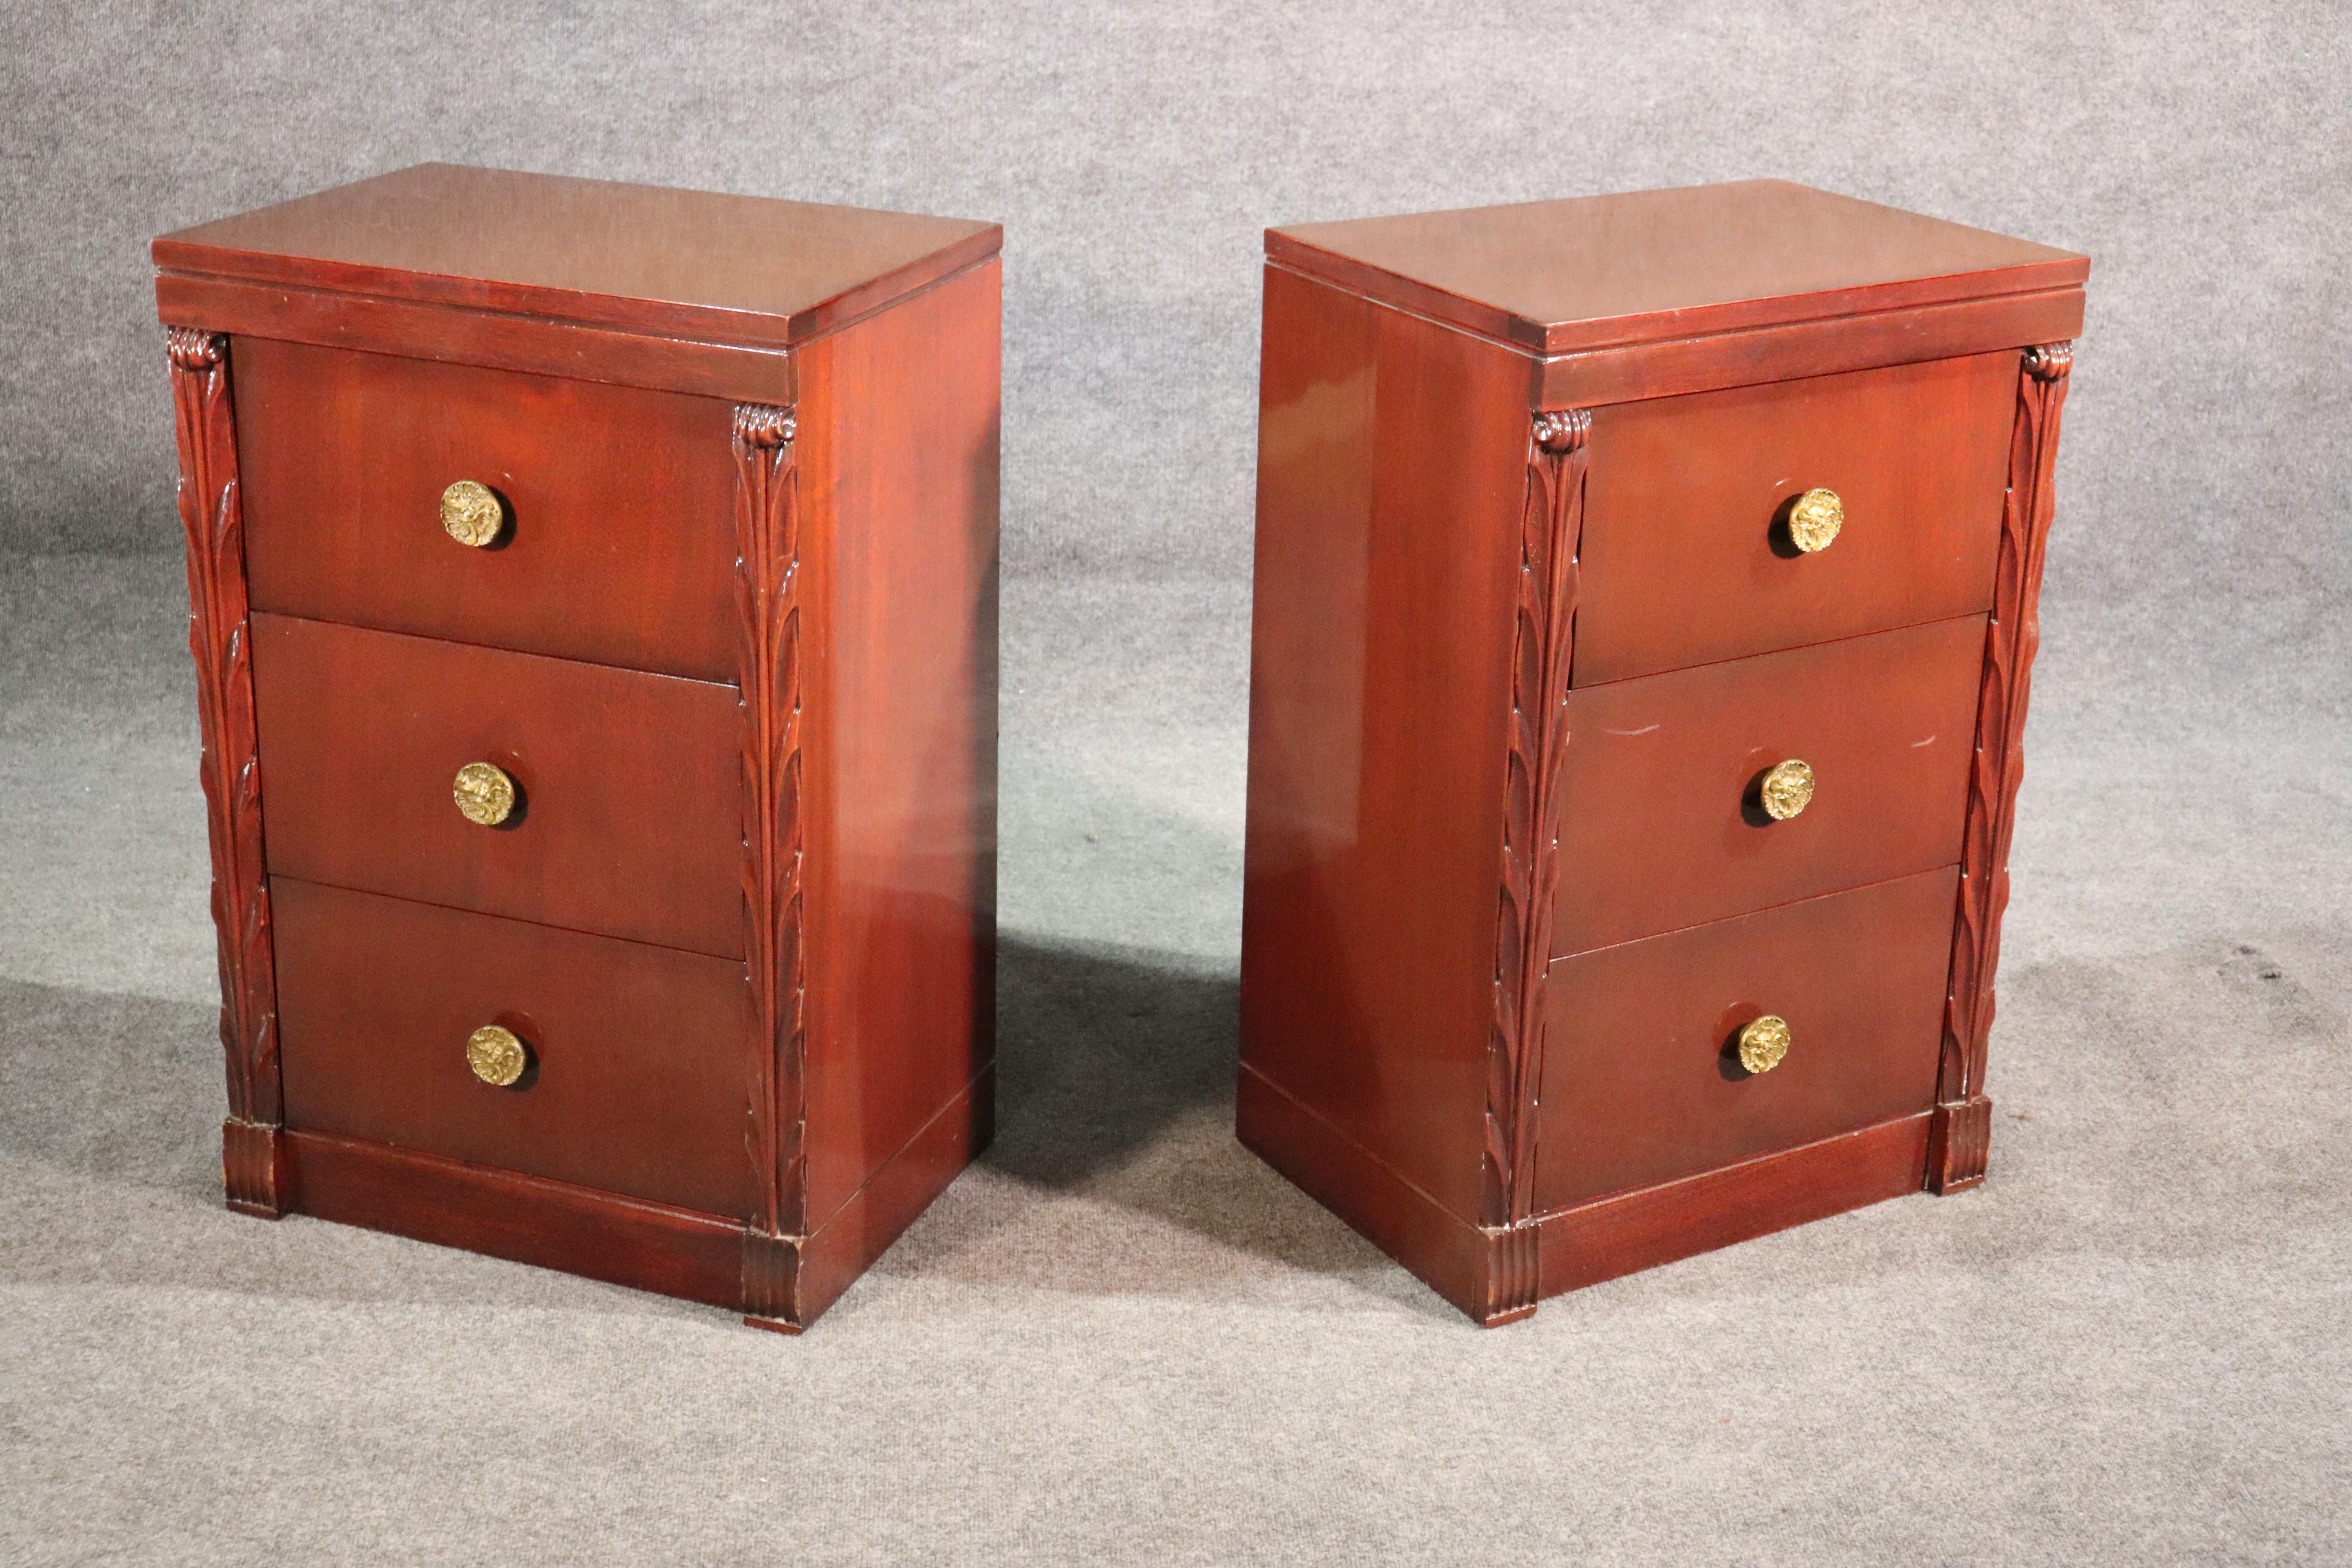 This is a nice pair of John Stuart nightstands in a red mahogany instead of a traditional brown mahogany, circa 1950. 

The stands measure 32.5 tall x 21 wide x 15 deep.